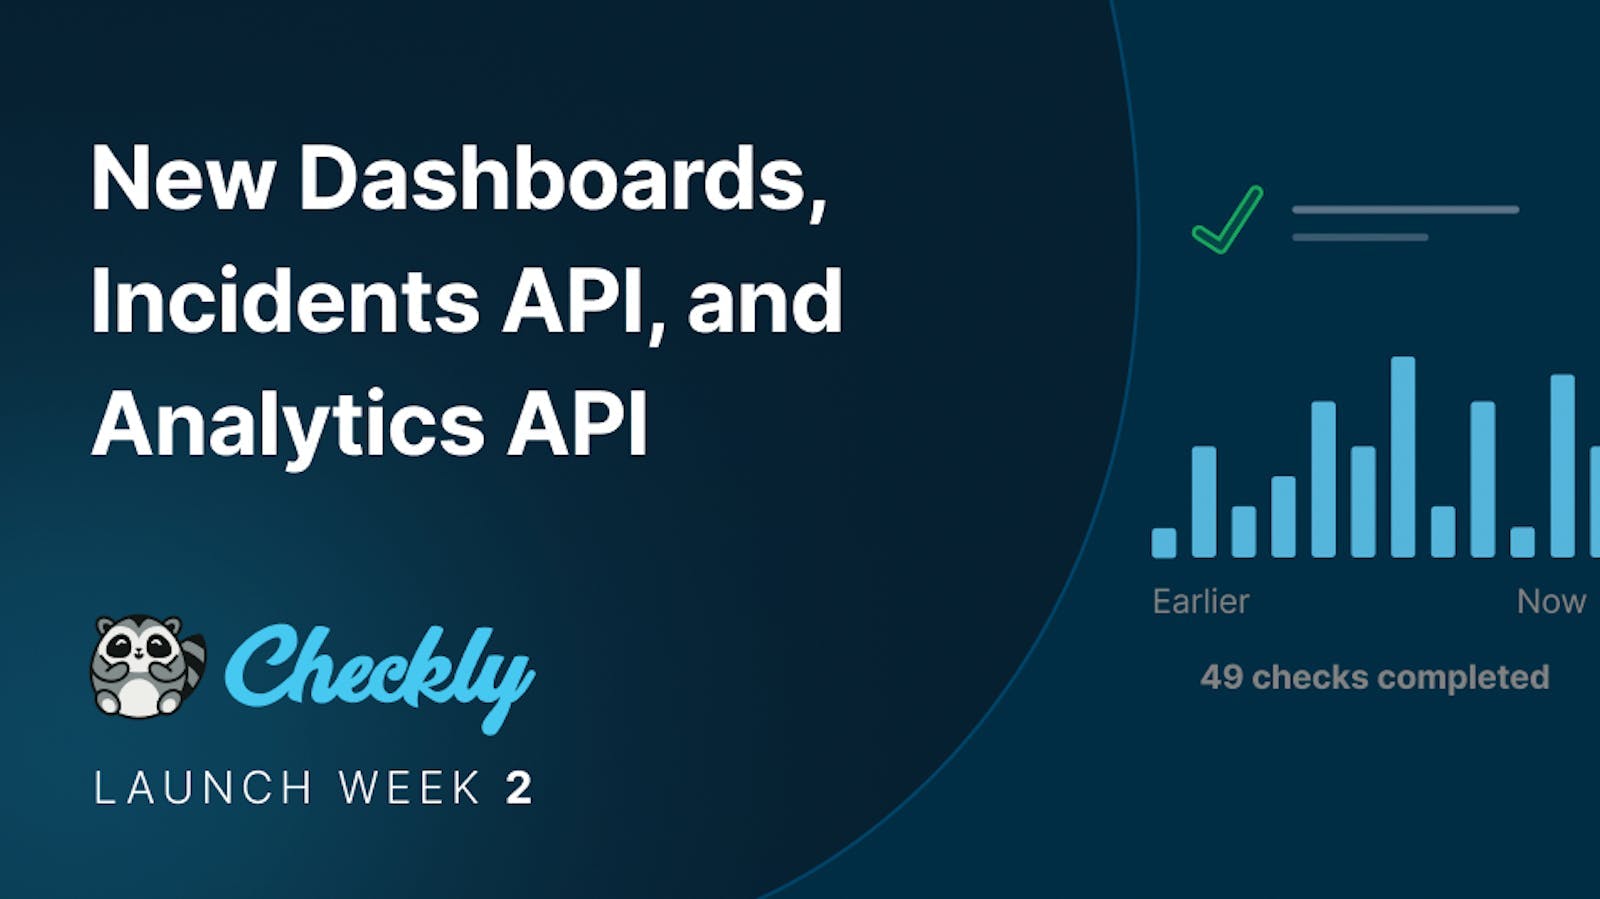 Checkly's new dashboards, incident management, and the new analytics API